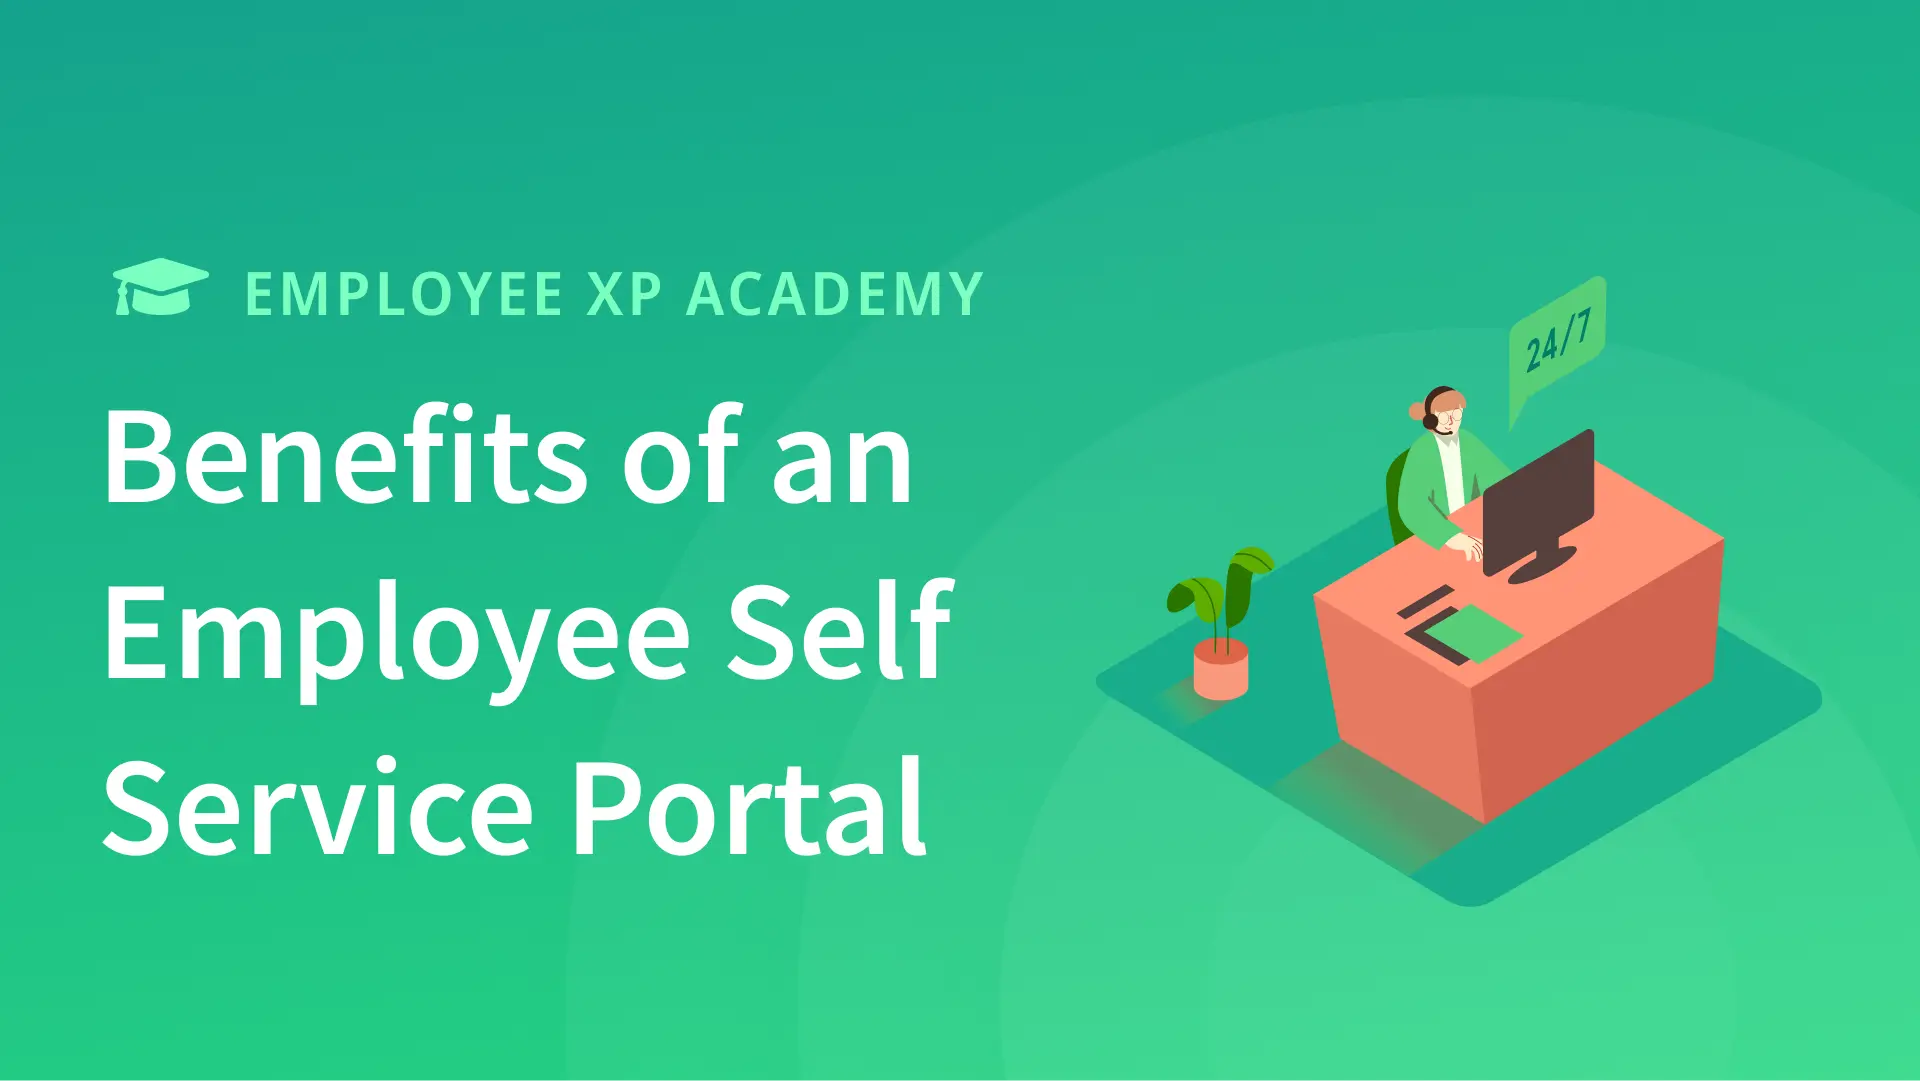 https://blog.clevy.io/content/images/2023/02/EXPA---Employee-Self-Service-Portal.webp